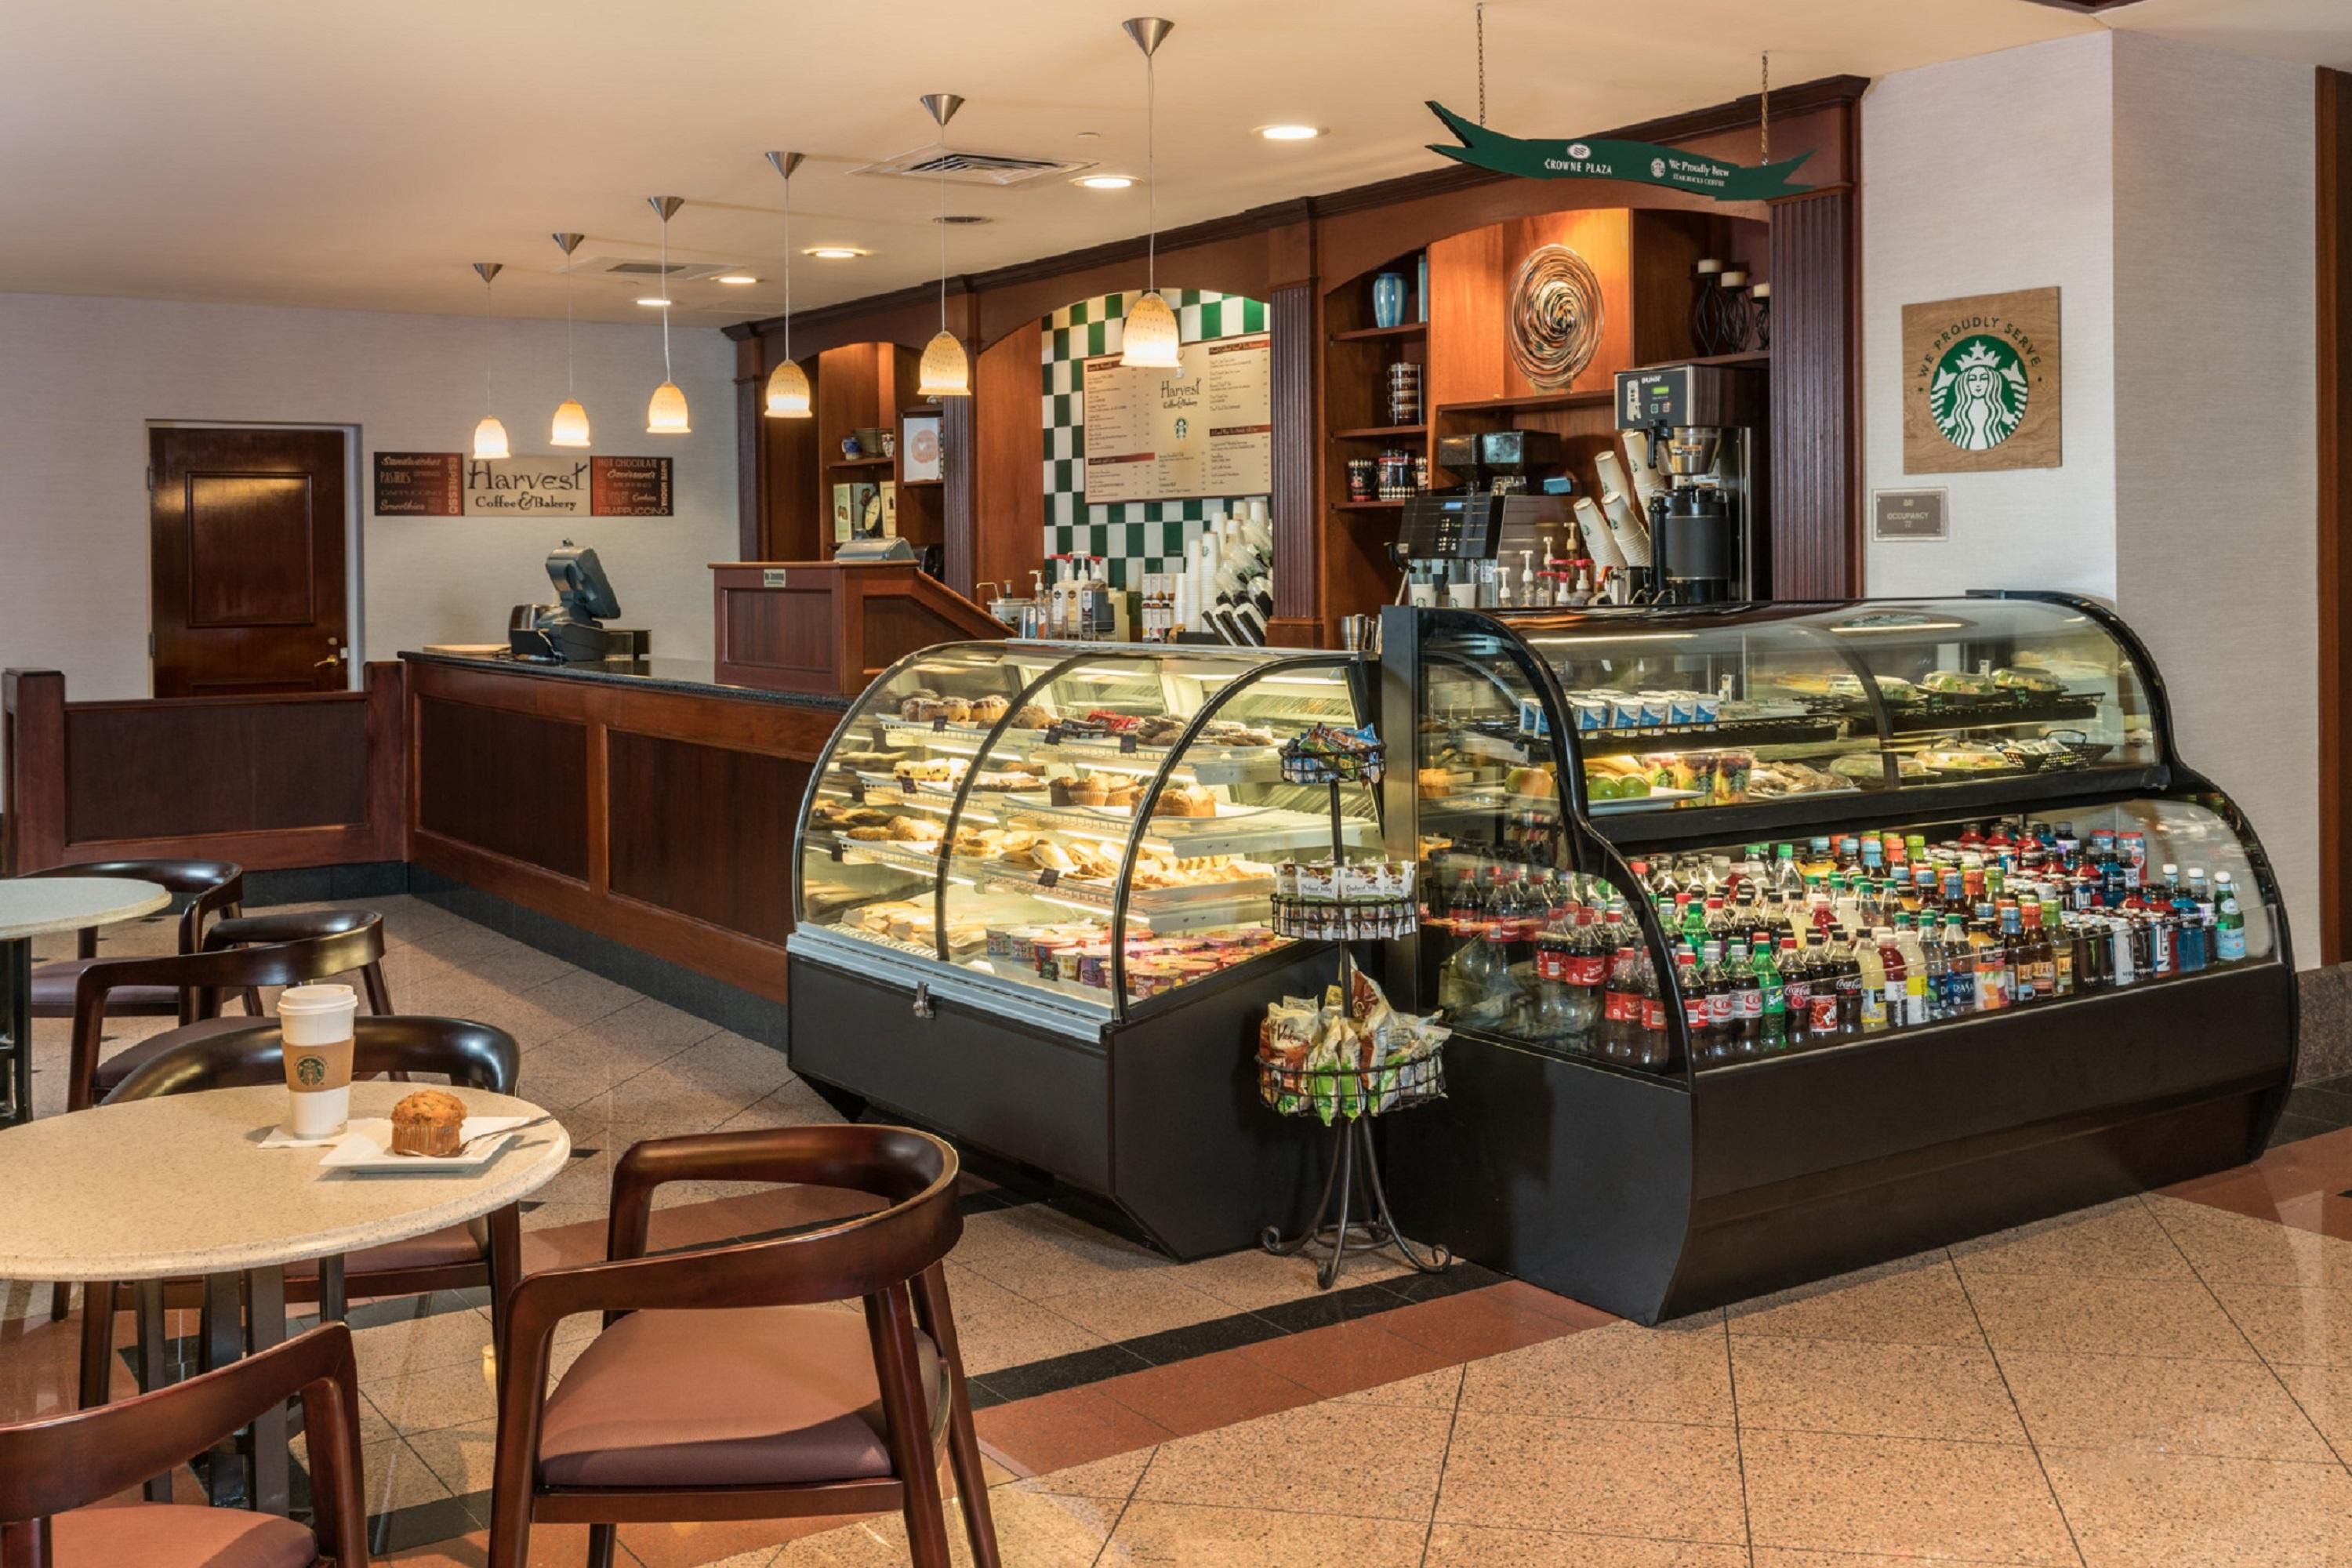 We proudly brew Starbucks and servce BUNN Gourmet at Harvest Café